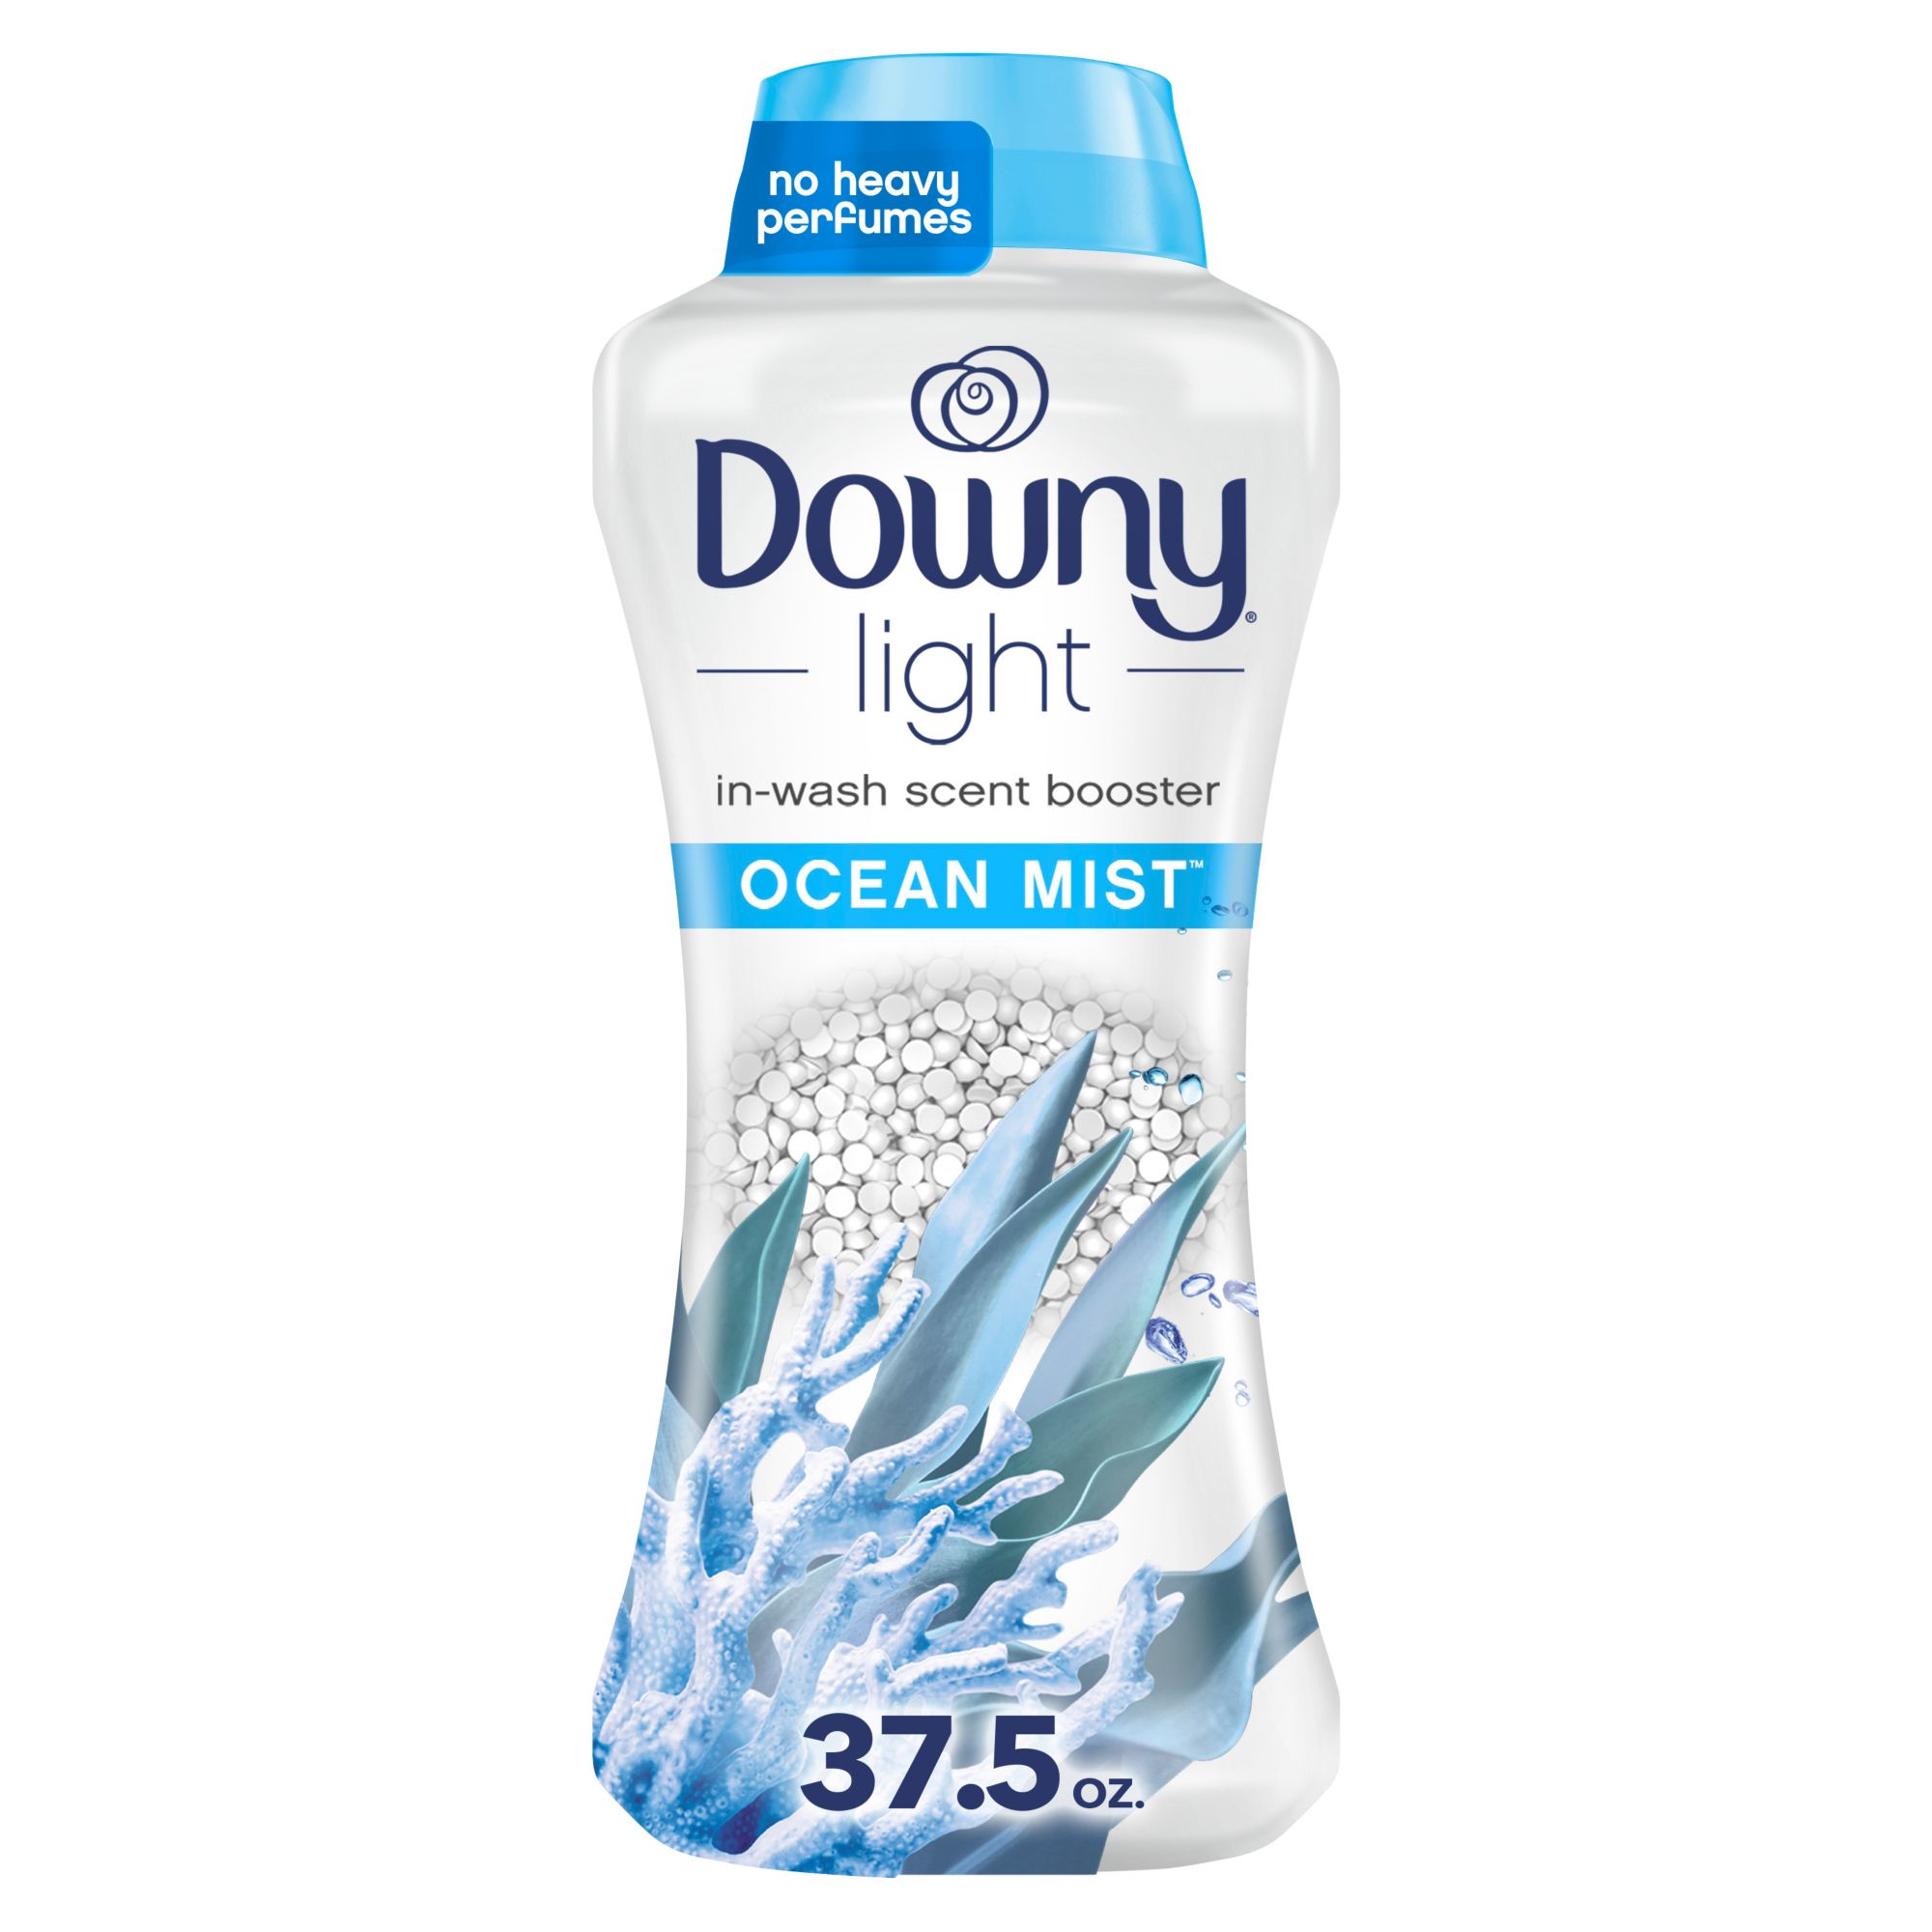 Downy Light Laundry Scent Booster Beads for Washer, 37.5 Oz